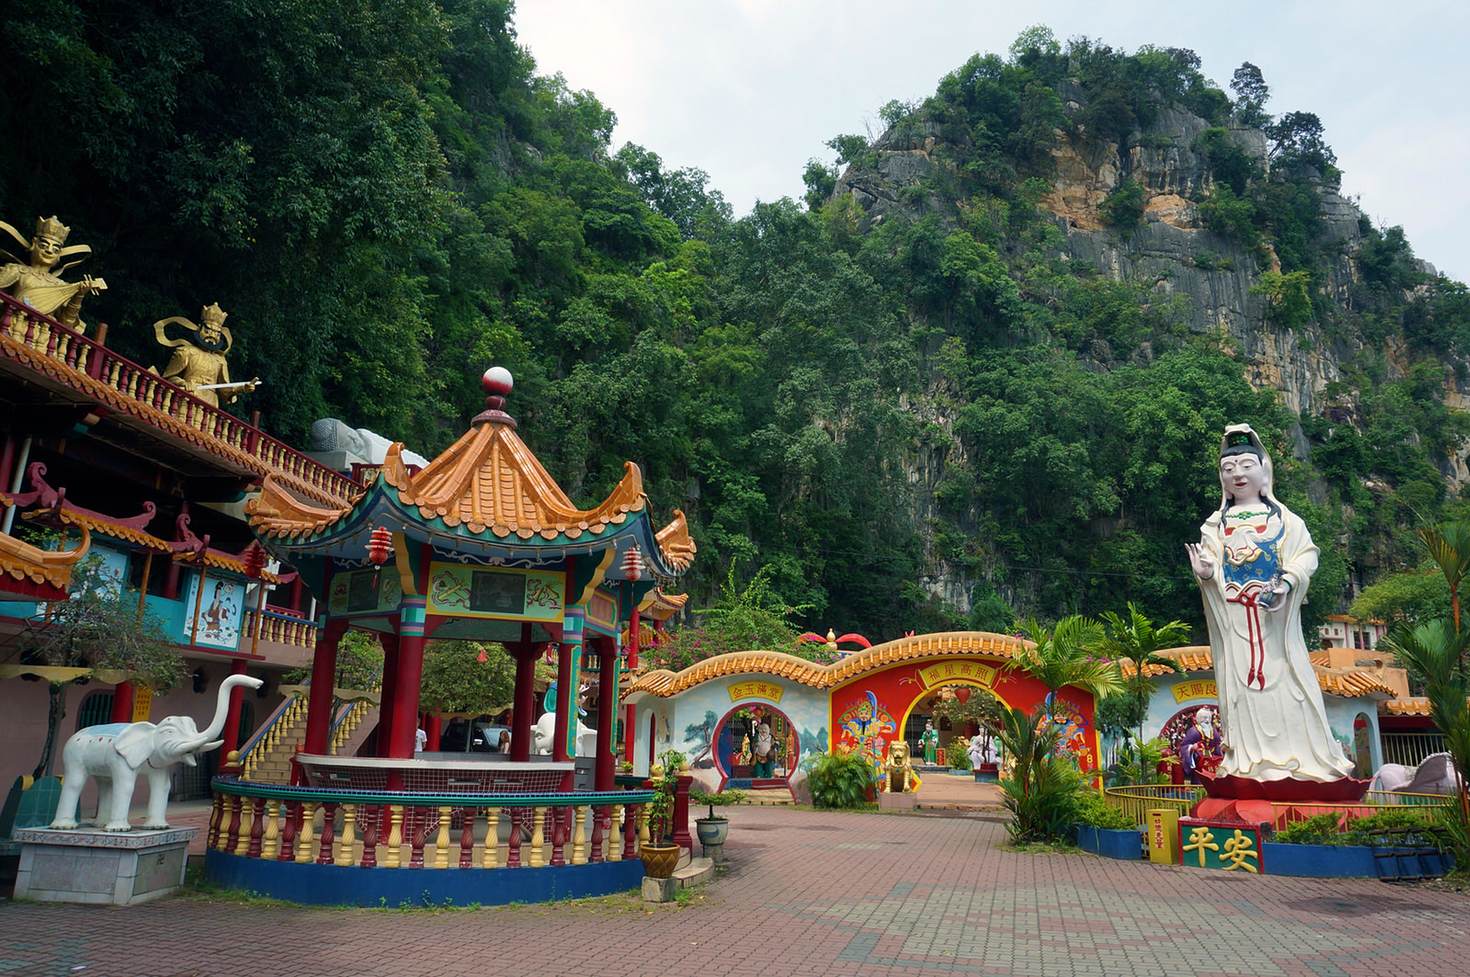 #LonelyPlanet: Ipoh Ranked 6th Hottest Asian Destination ...